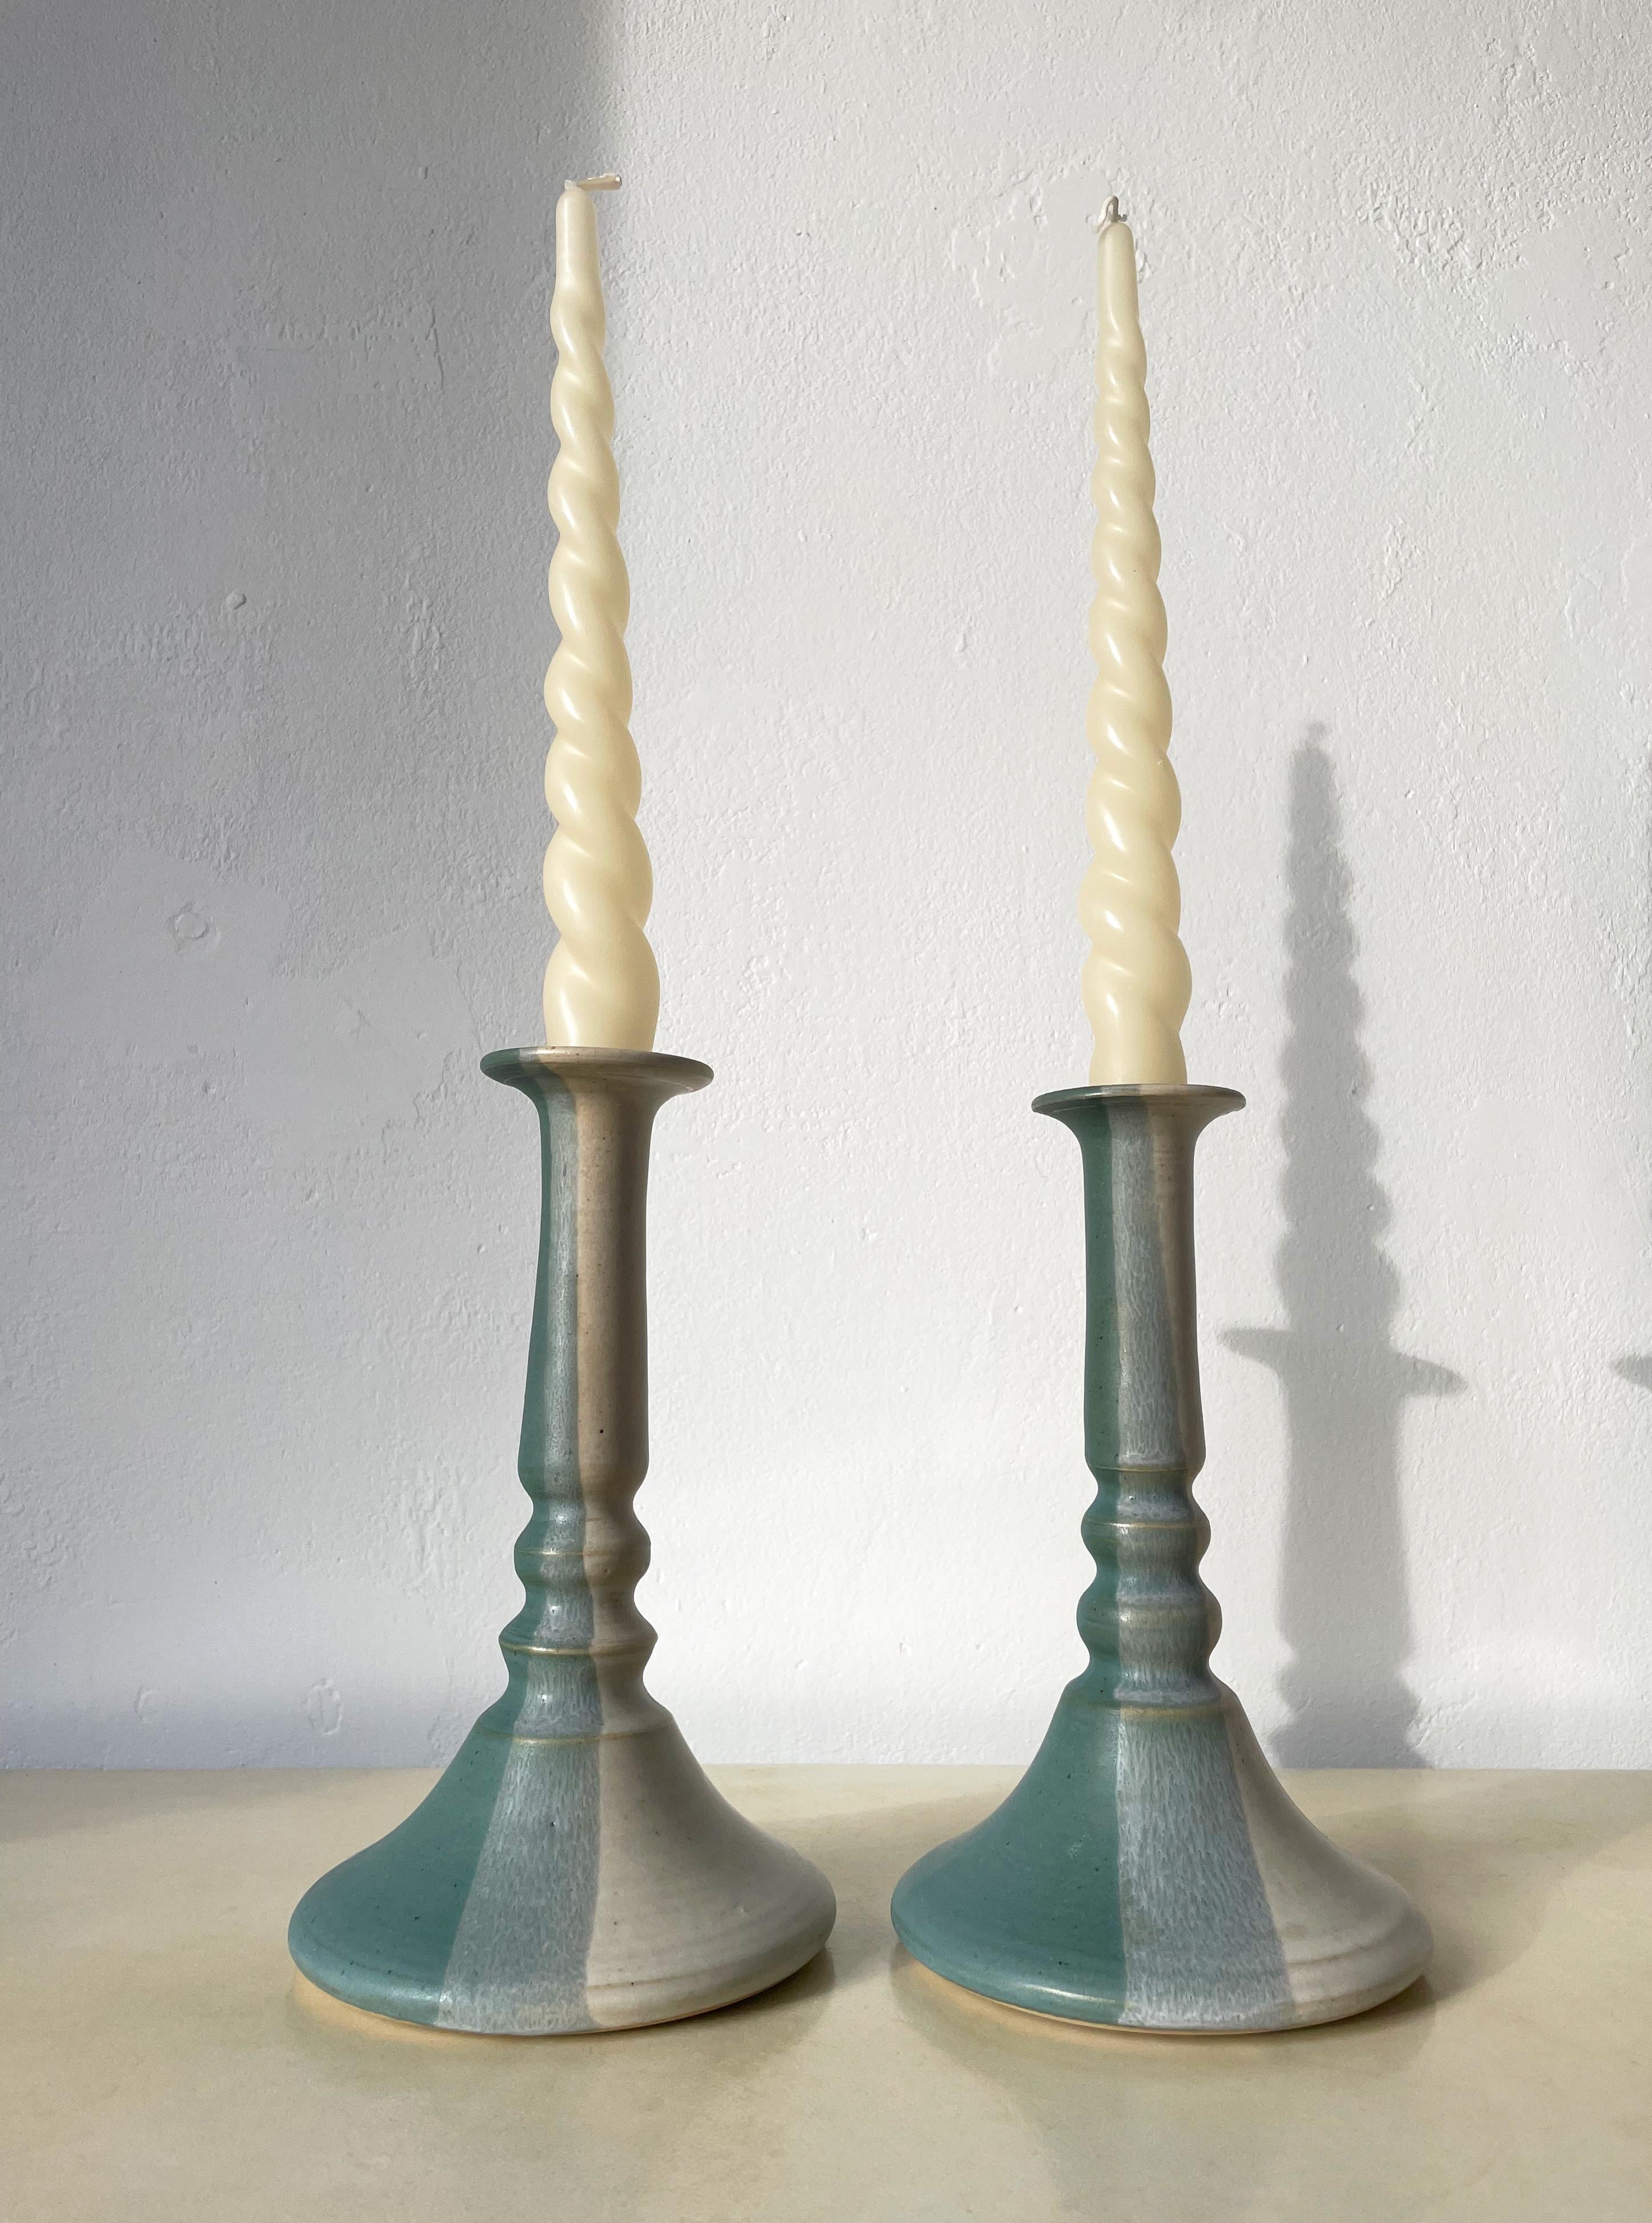 Set of two midcentury Scandinavian Modern ceramic candle holders in aqua and white colors. Vertical striped glaze in light beige white, aqua and green. Each handmade and unique - one item is slightly shorter than the other. Signed under base.